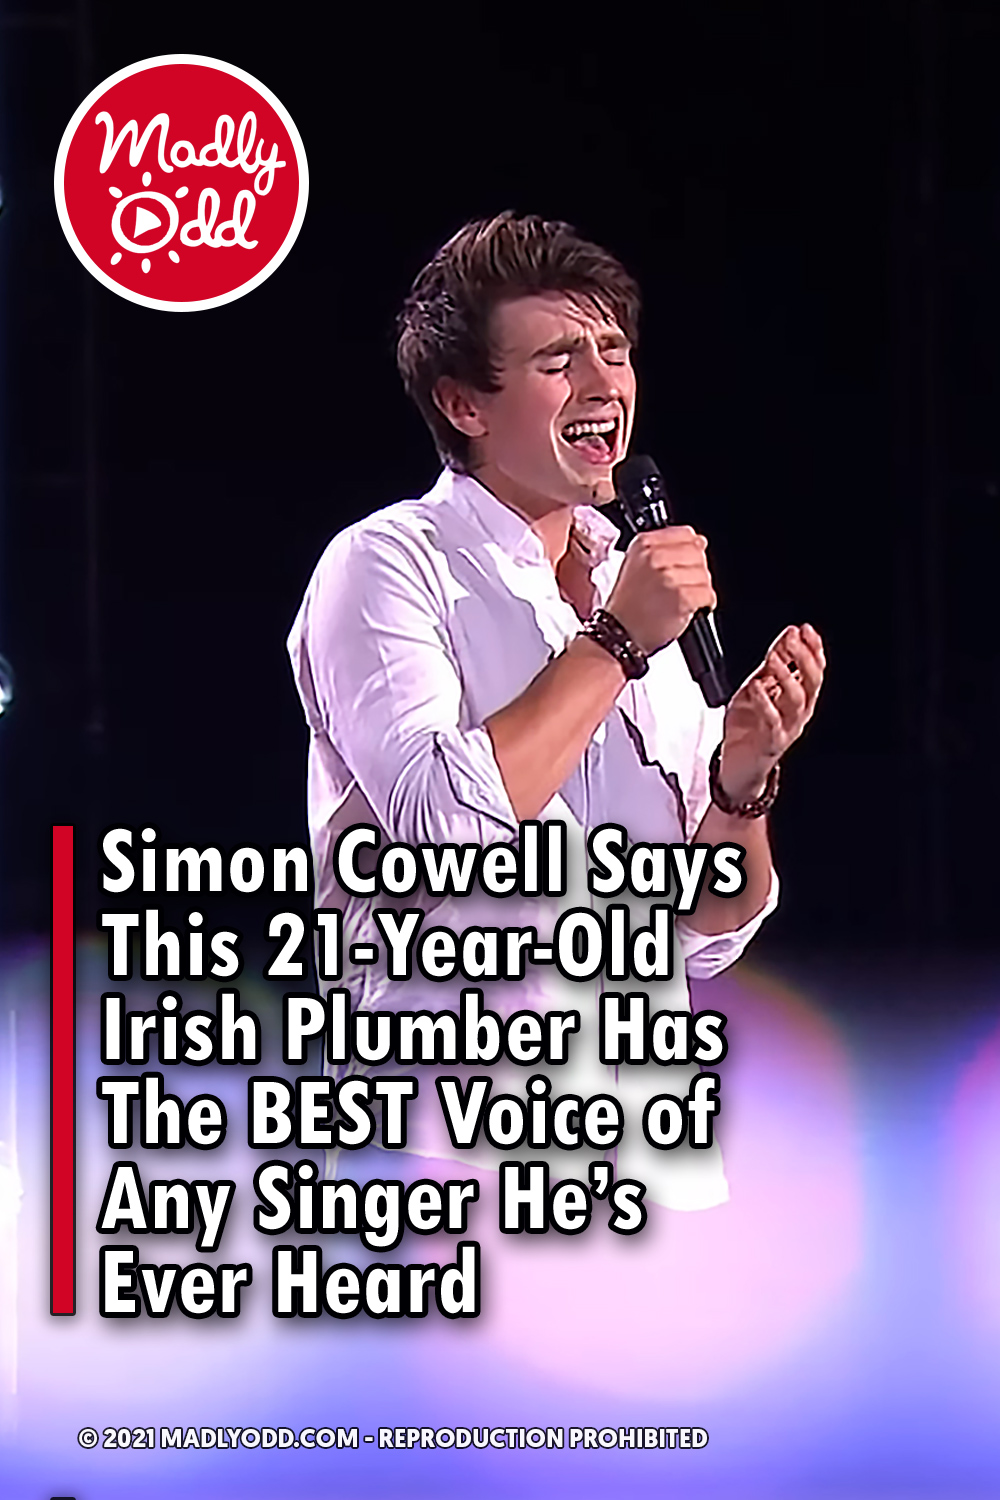 Simon Cowell Says This 21-Year-Old Irish Plumber Has The BEST Voice of Any Singer He\'s Ever Heard